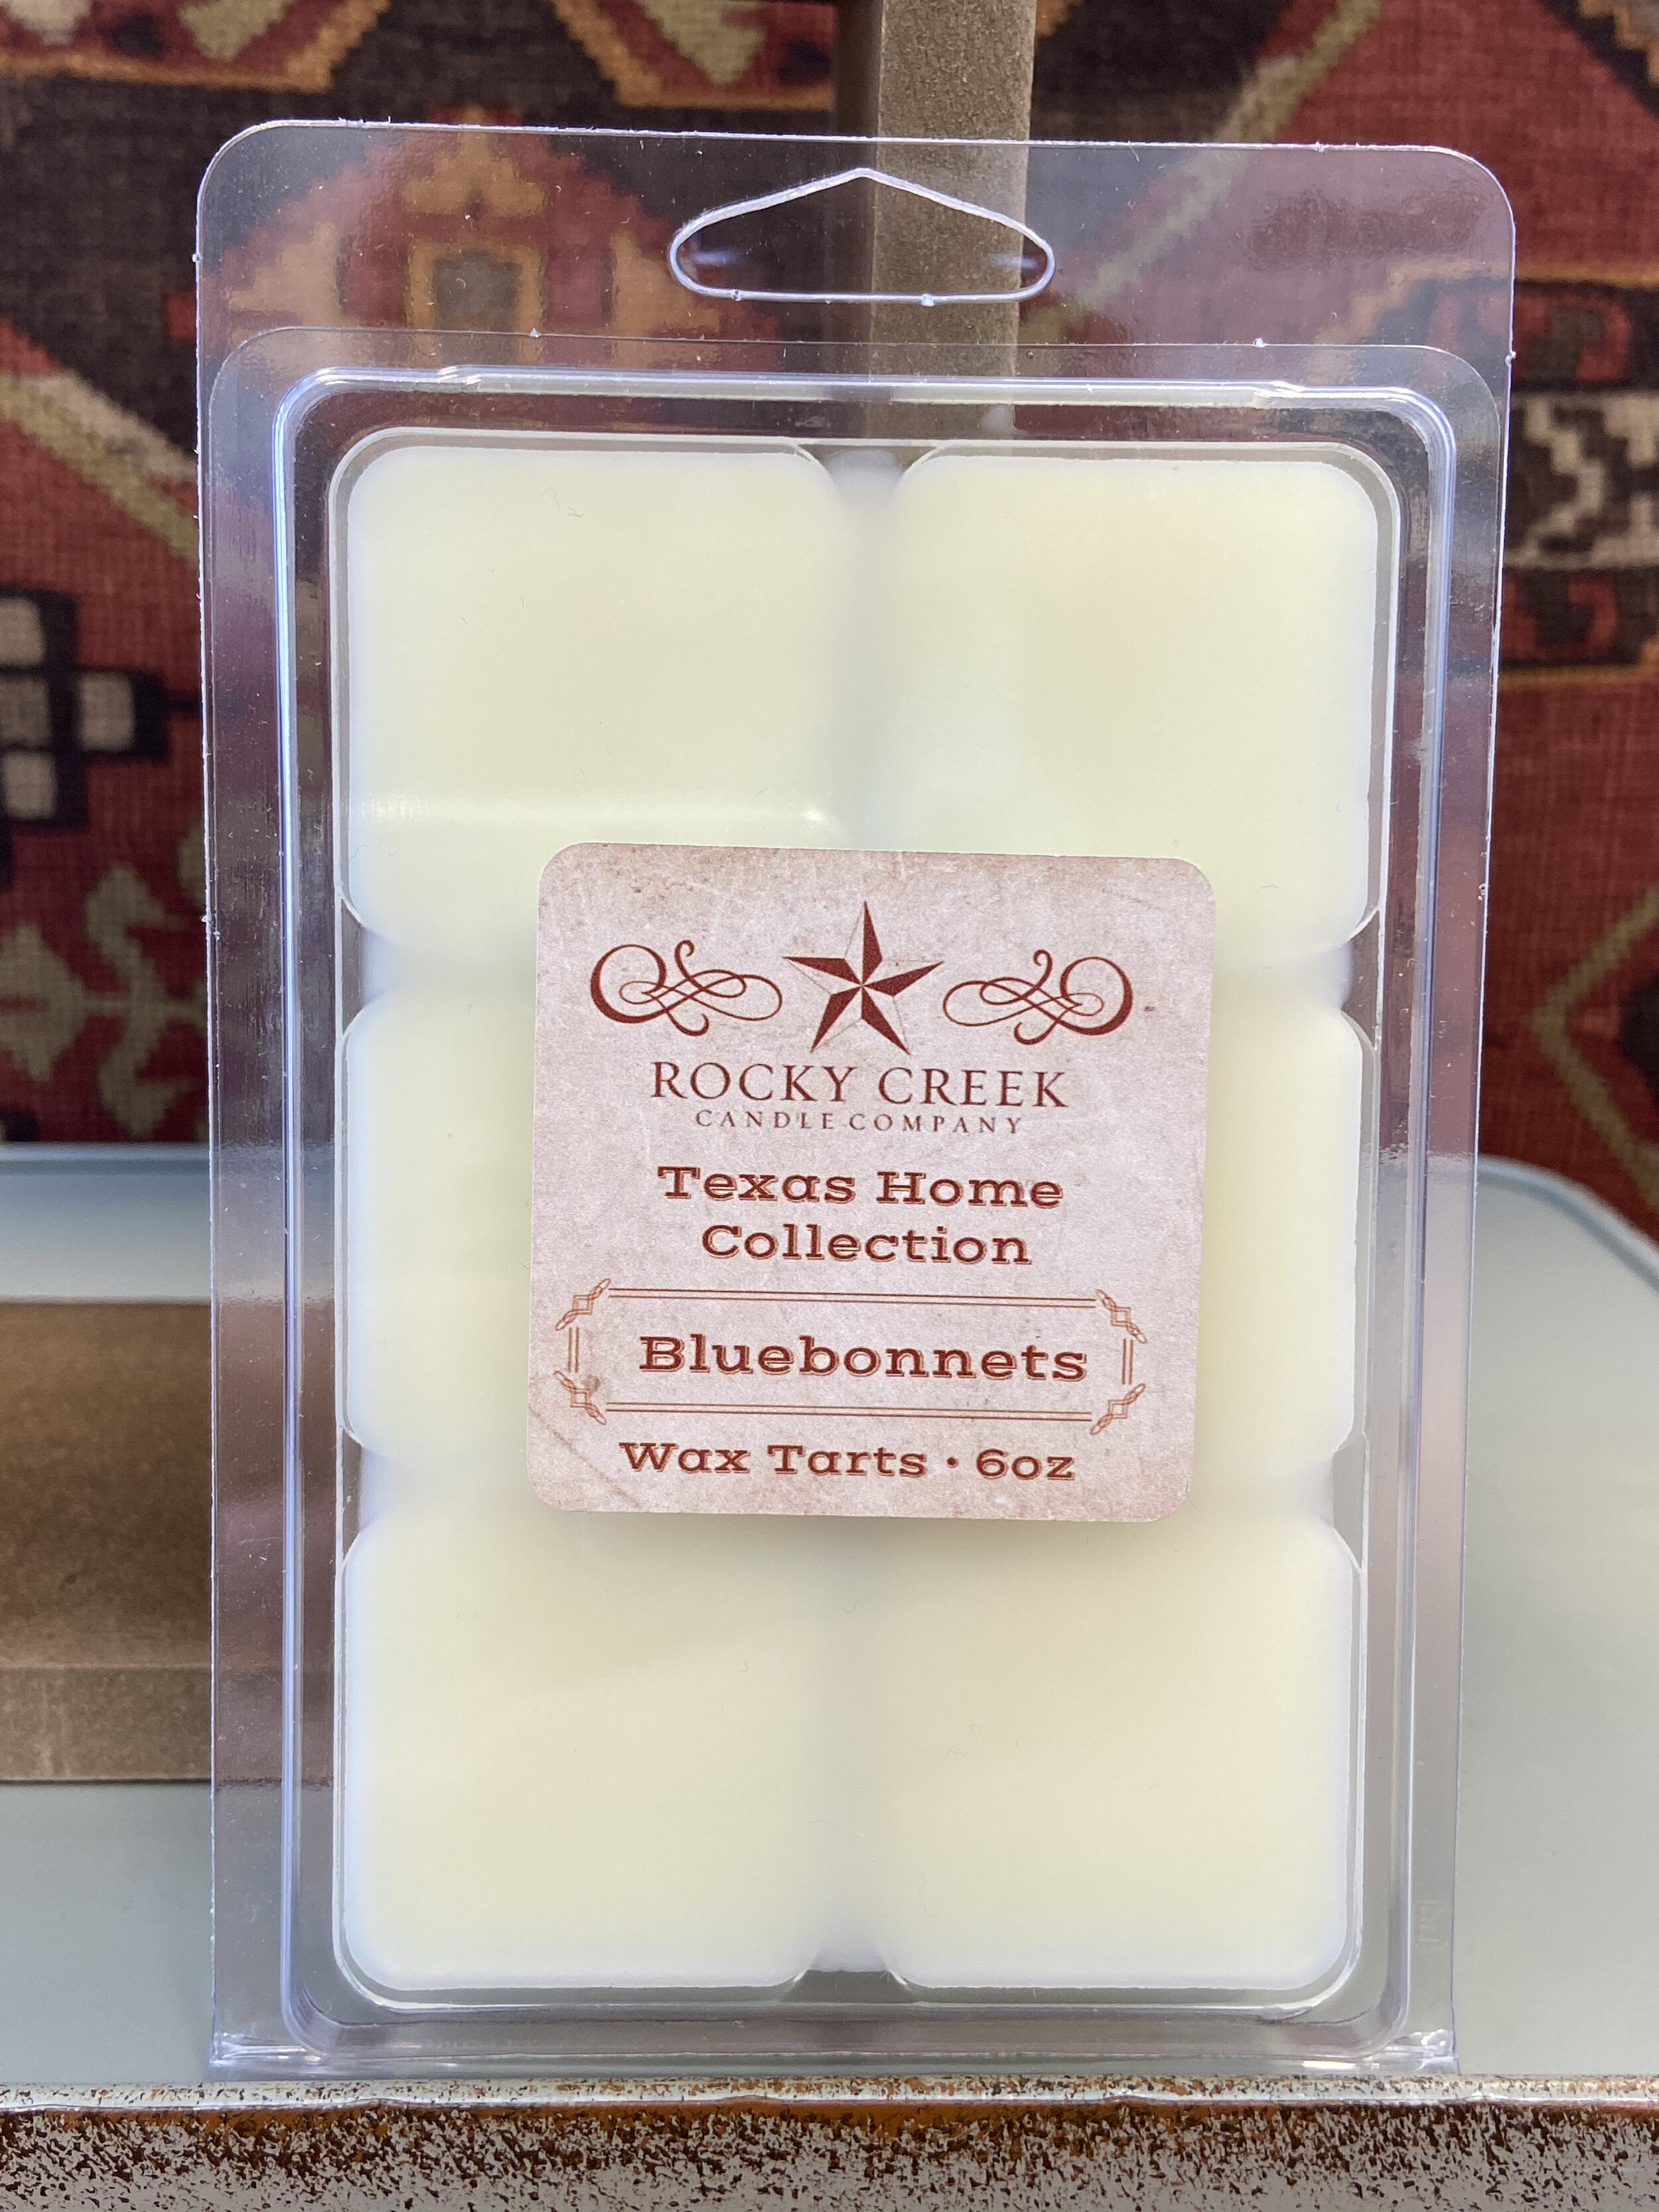 Texas Bluebonnet, Lone Star Candles & More's Premium Hand Poured Strongly  Scented Wax Melts, Gentle Floral Blend, 18 Wax Cubes, Think Springtime in